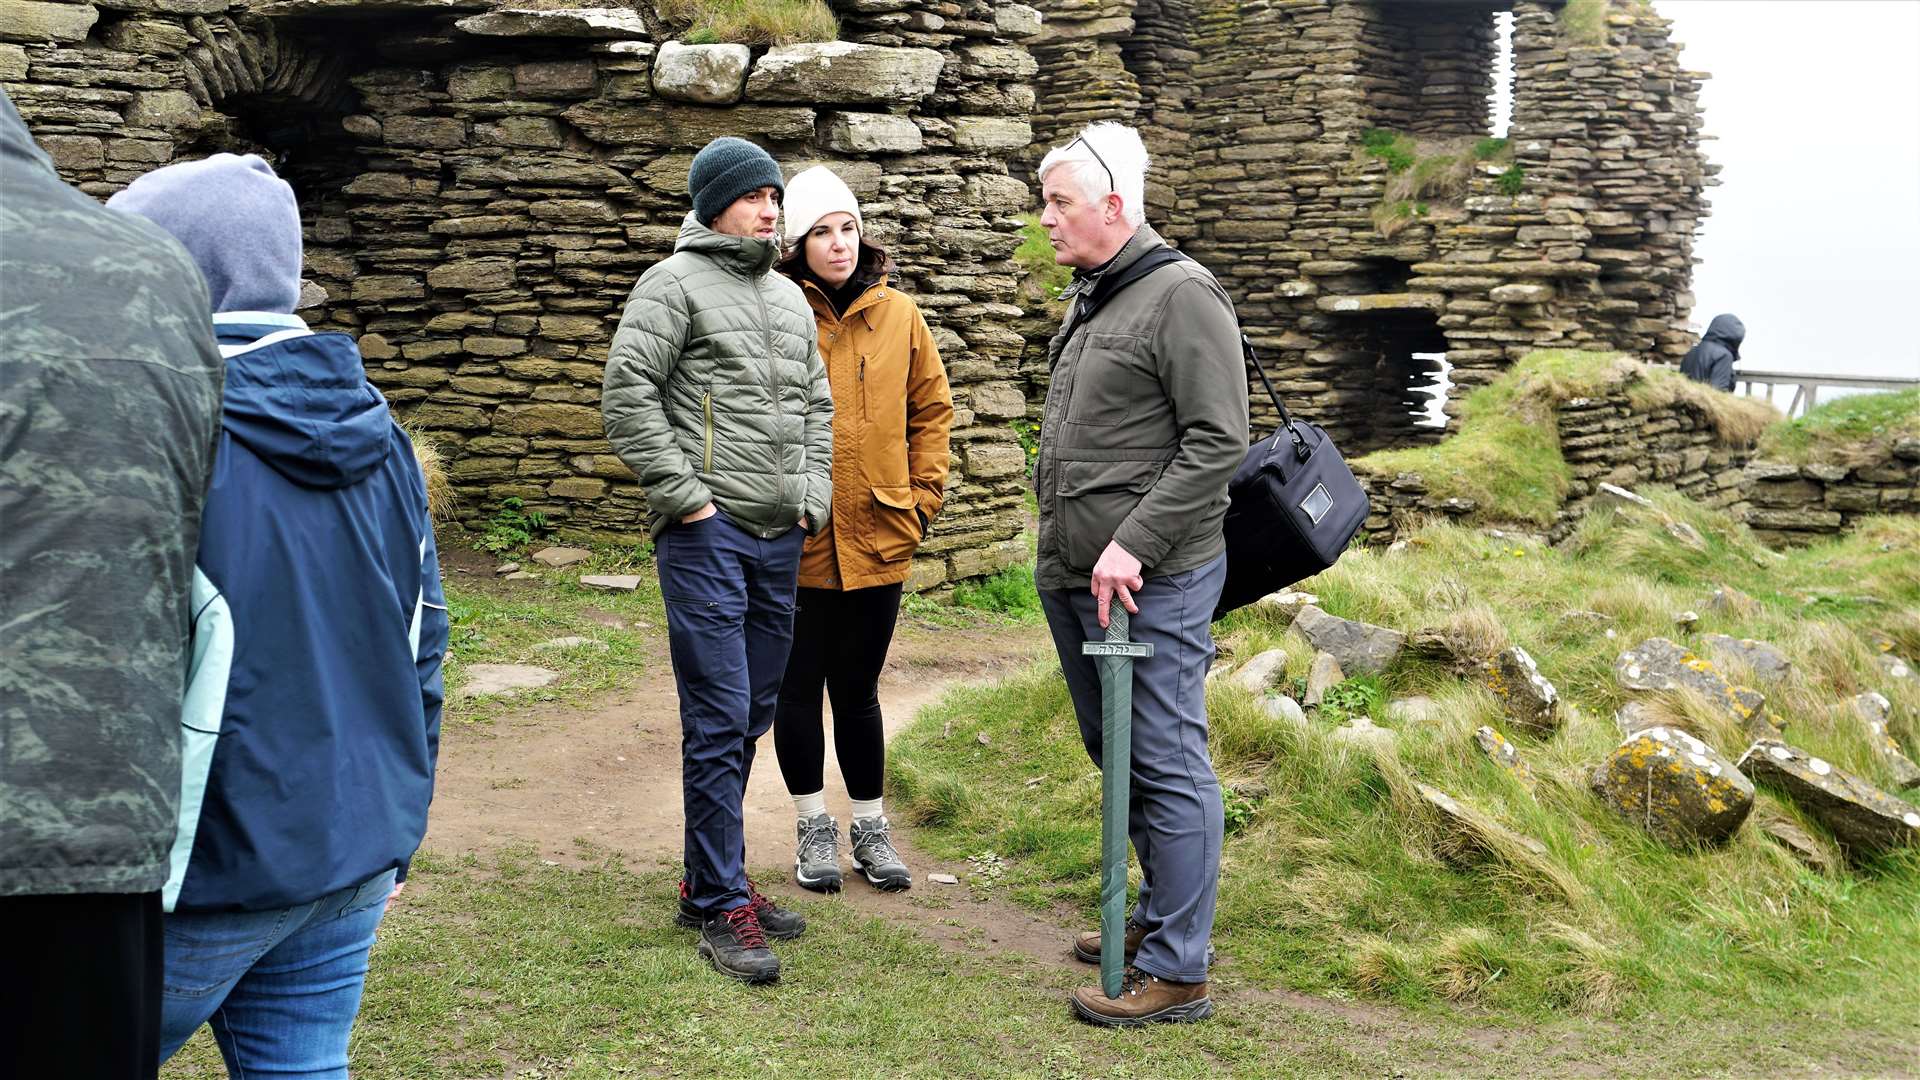 Shawn talks to visitors at the castle about the history and myths surround the ancient edifice. Picture: DGS